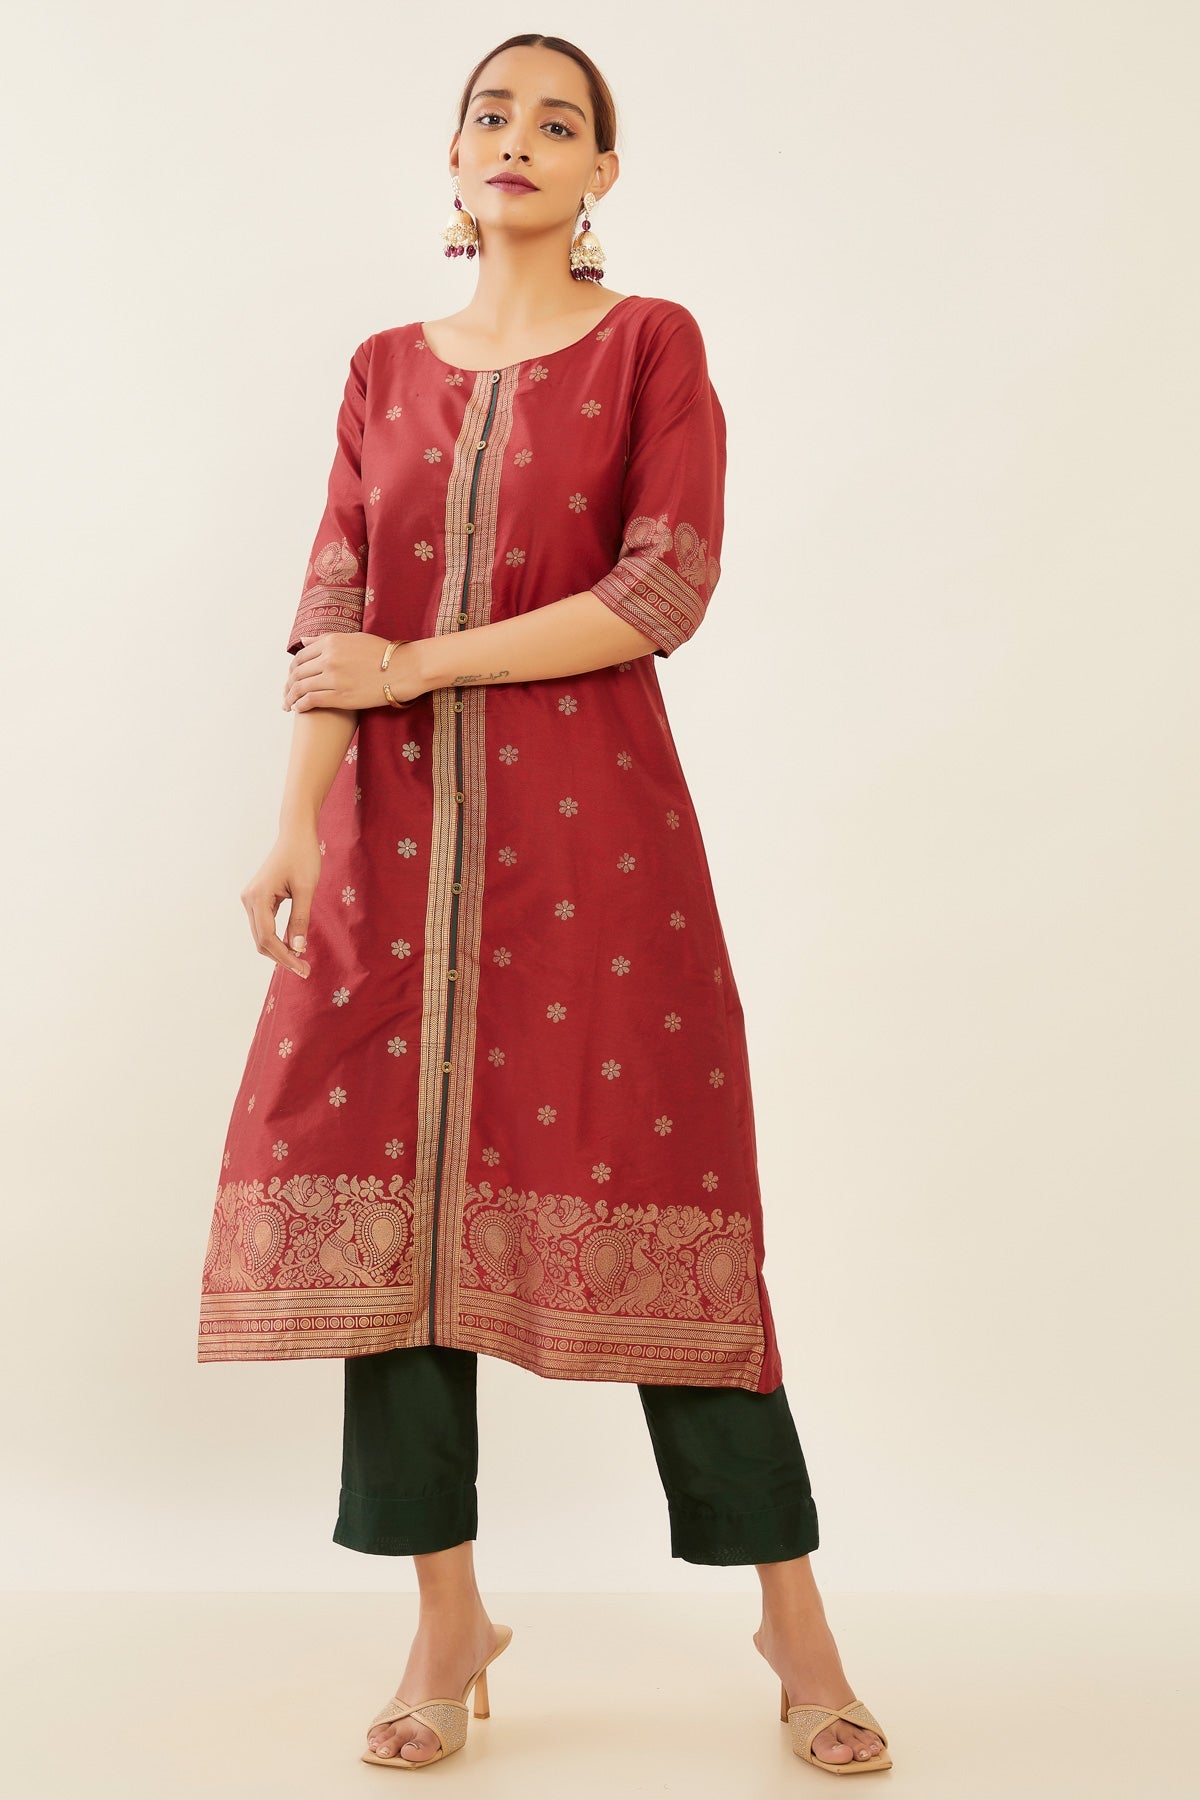 All Over Floral Peacock Motif Printed A Line Kurta Maroon